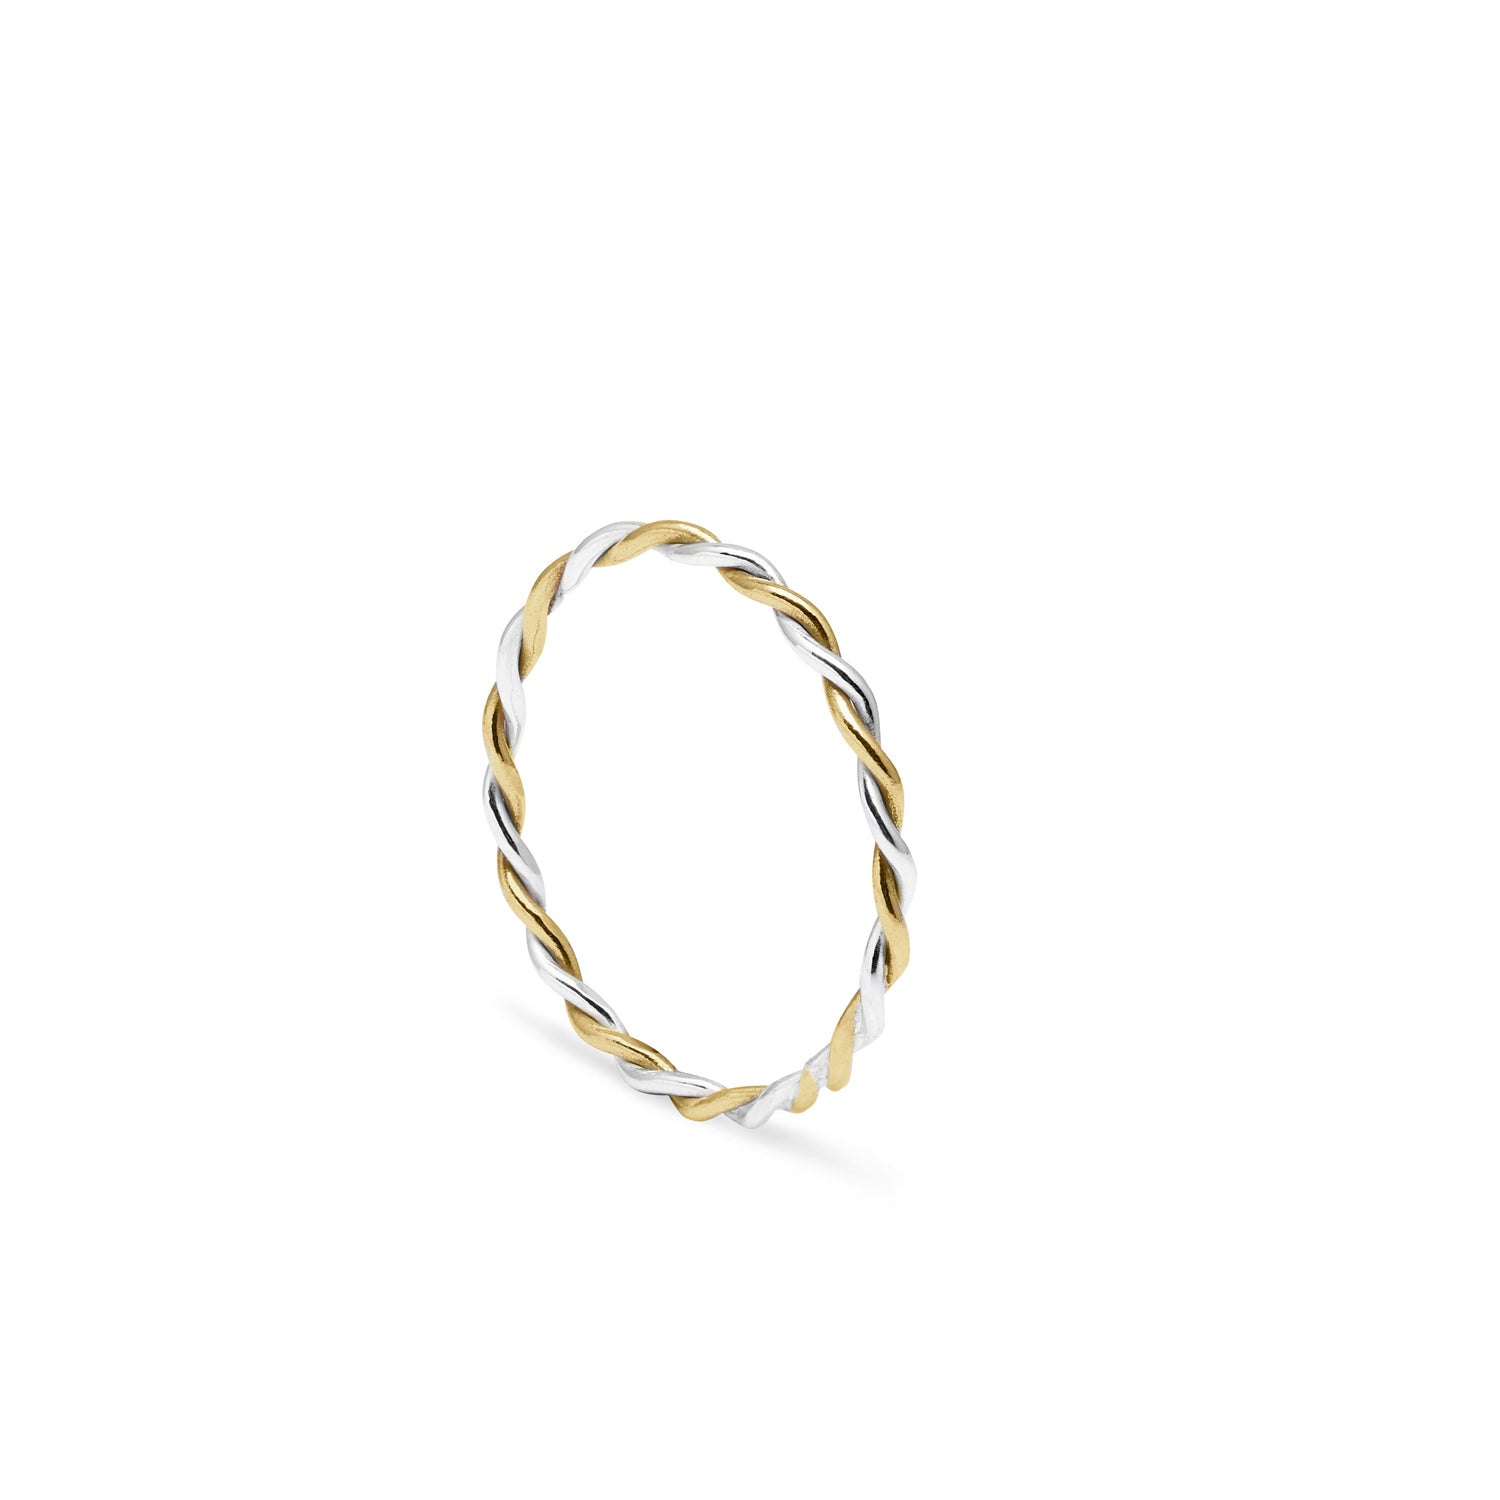 Two-tone Twist Stacking Ring - 9k Yellow Gold & Silver - Myia Bonner Jewellery